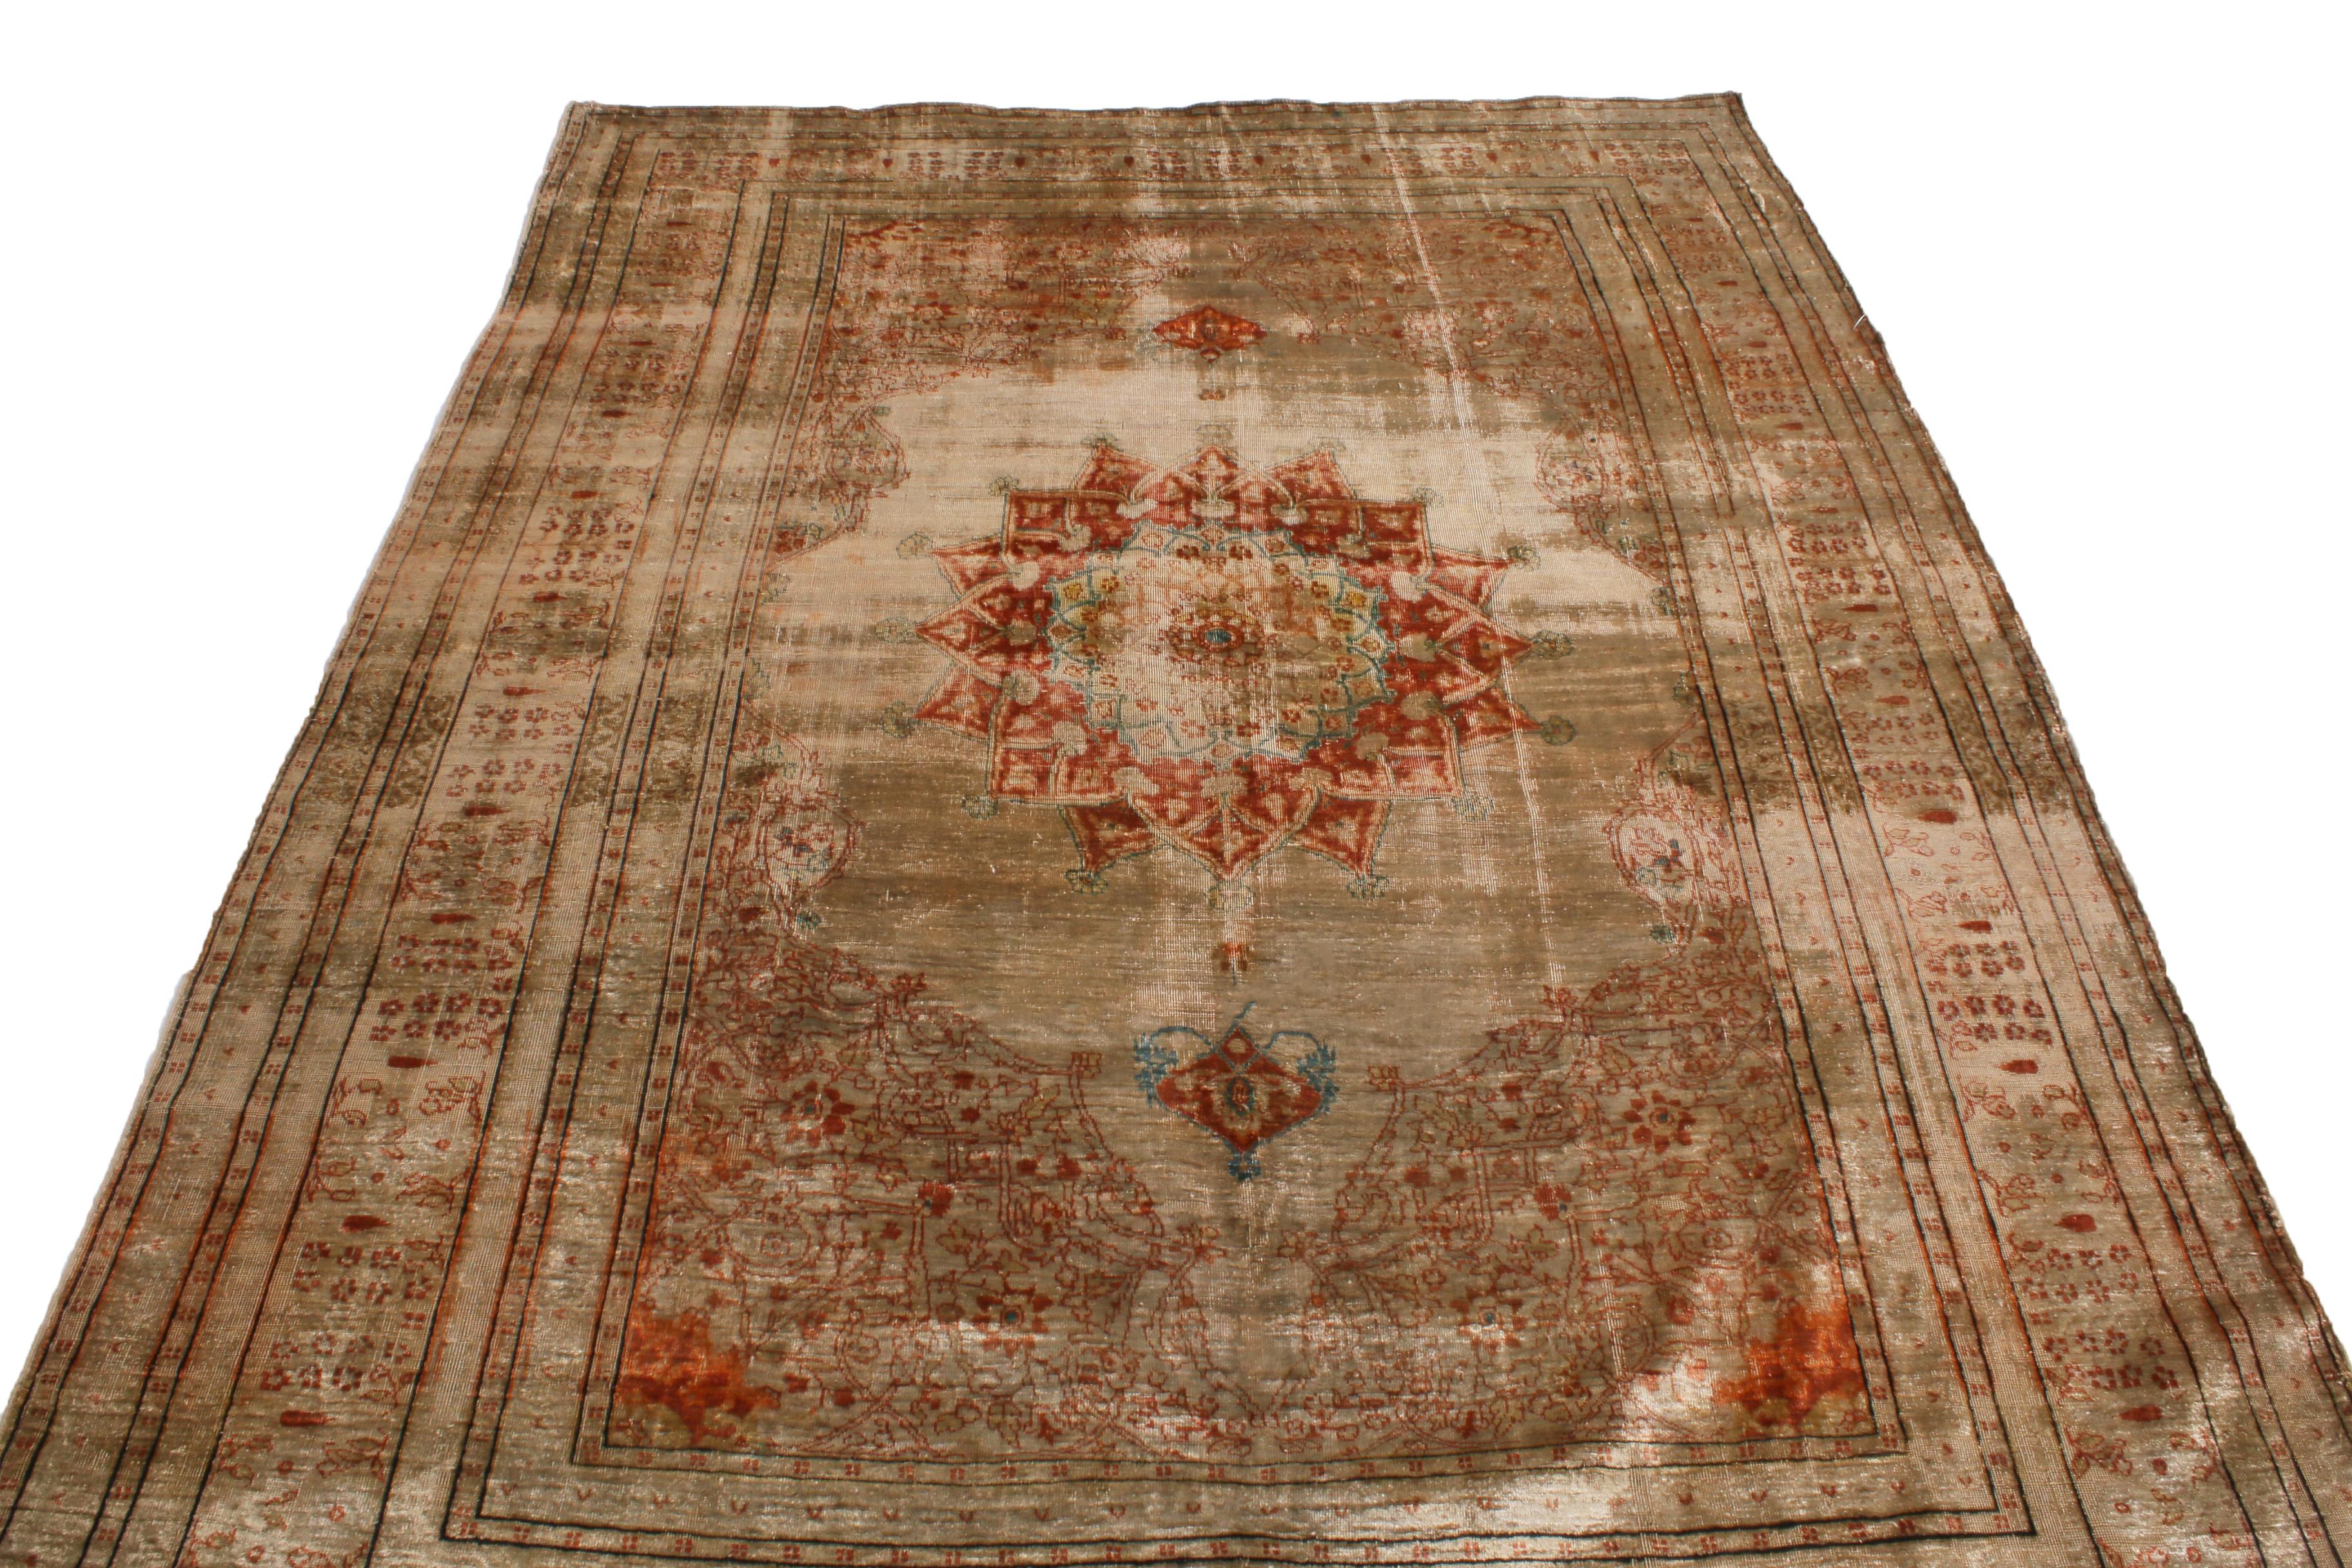 Originating from Persia in 1910, this antique Tabriz Persian rug is hand-knotted with a soft, quality wool pile married to some of the most distinguished muted and vibrant colorways. Featuring a medallion style field design in elevated brown and